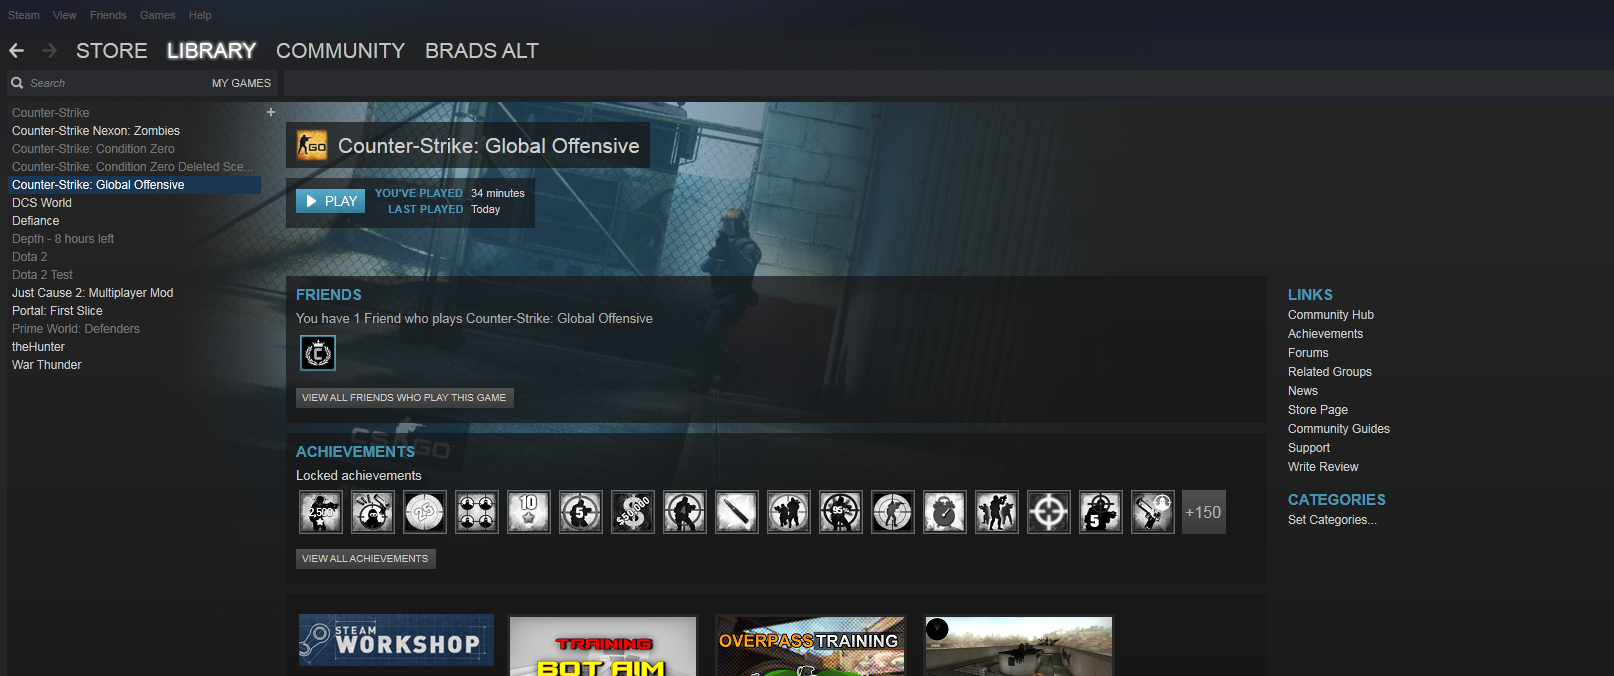 steam hours played hack